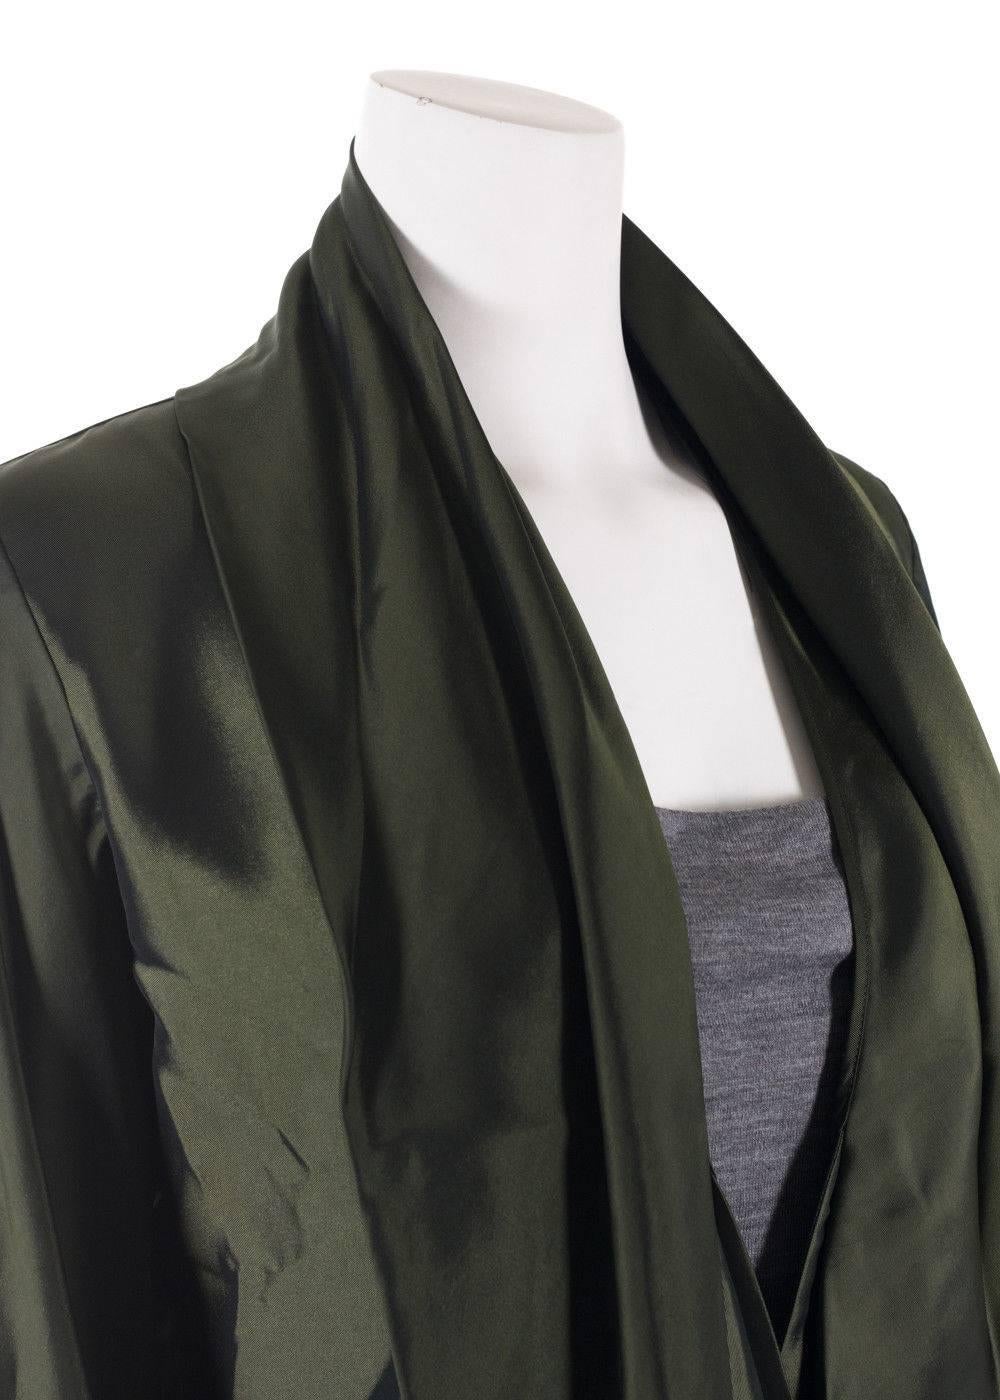 Brand New Haider Ackermann Draped Satin Blouse
Original Tag
Retails in Stores & Online for $2615
Women's Size EUR 38/ US 0 Fits True to Size

Dare to wear your Haider Ackermann Blouse? Your sophisticated satin top is the perfect blend of militant